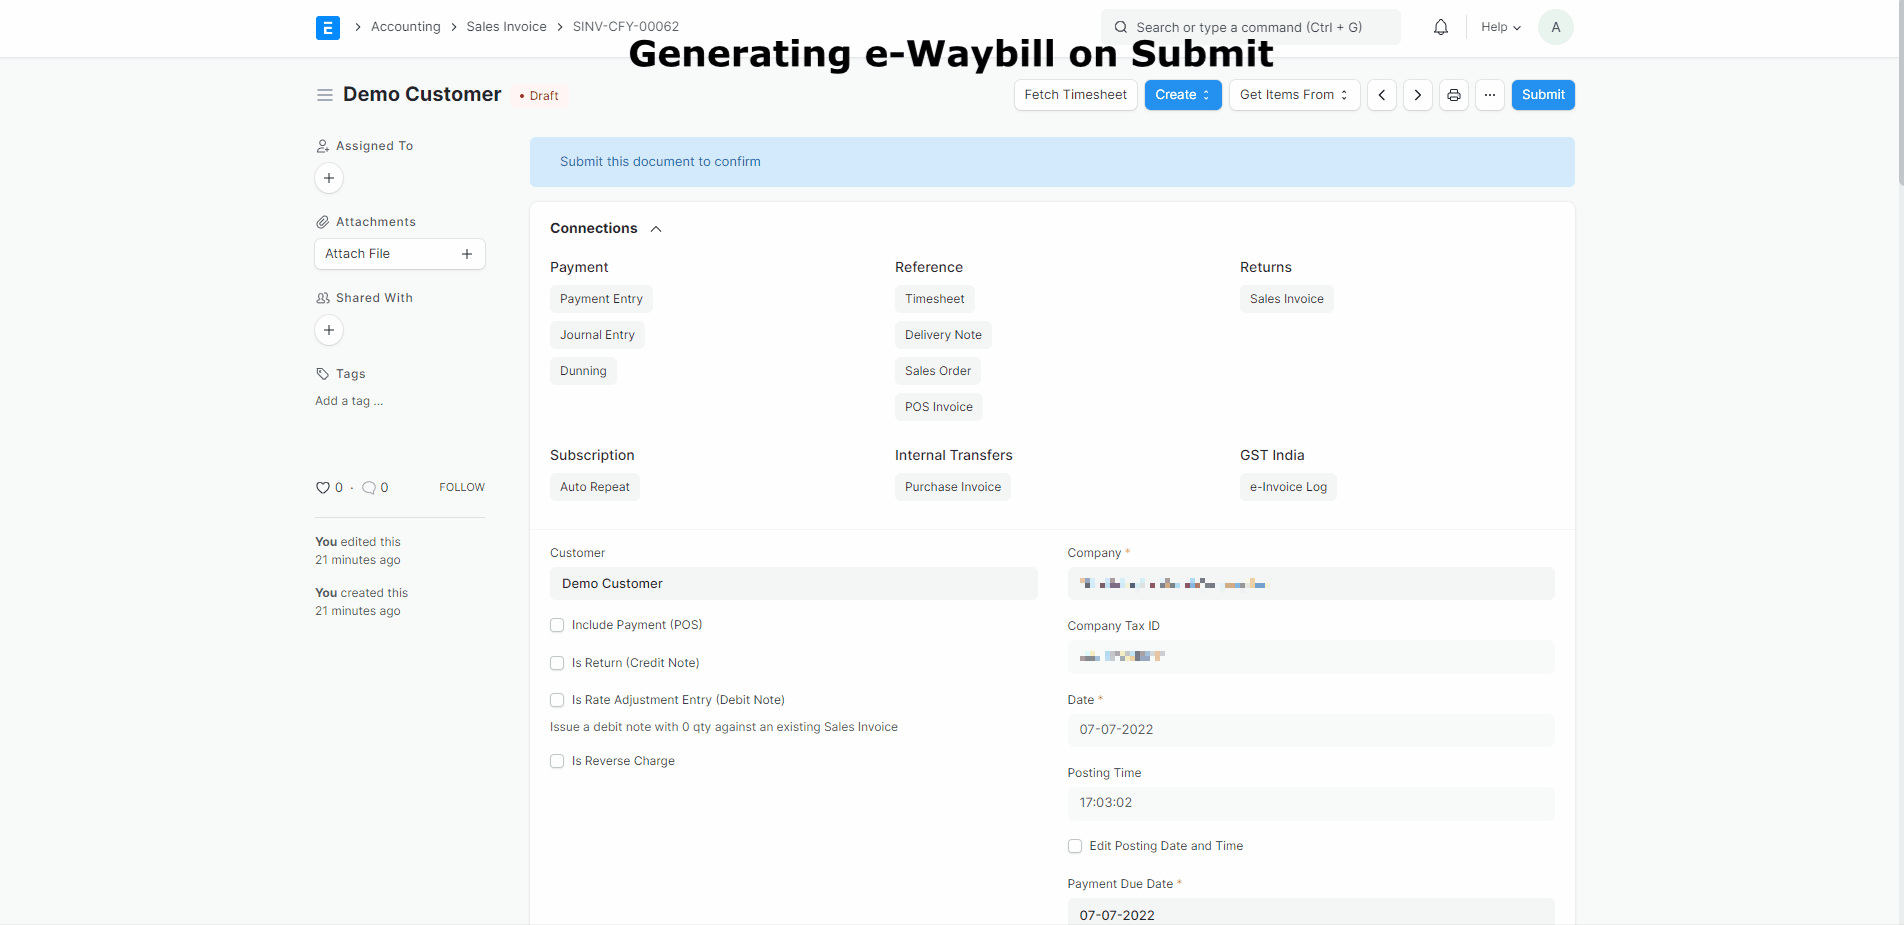 Generating e-Waybill on Submit